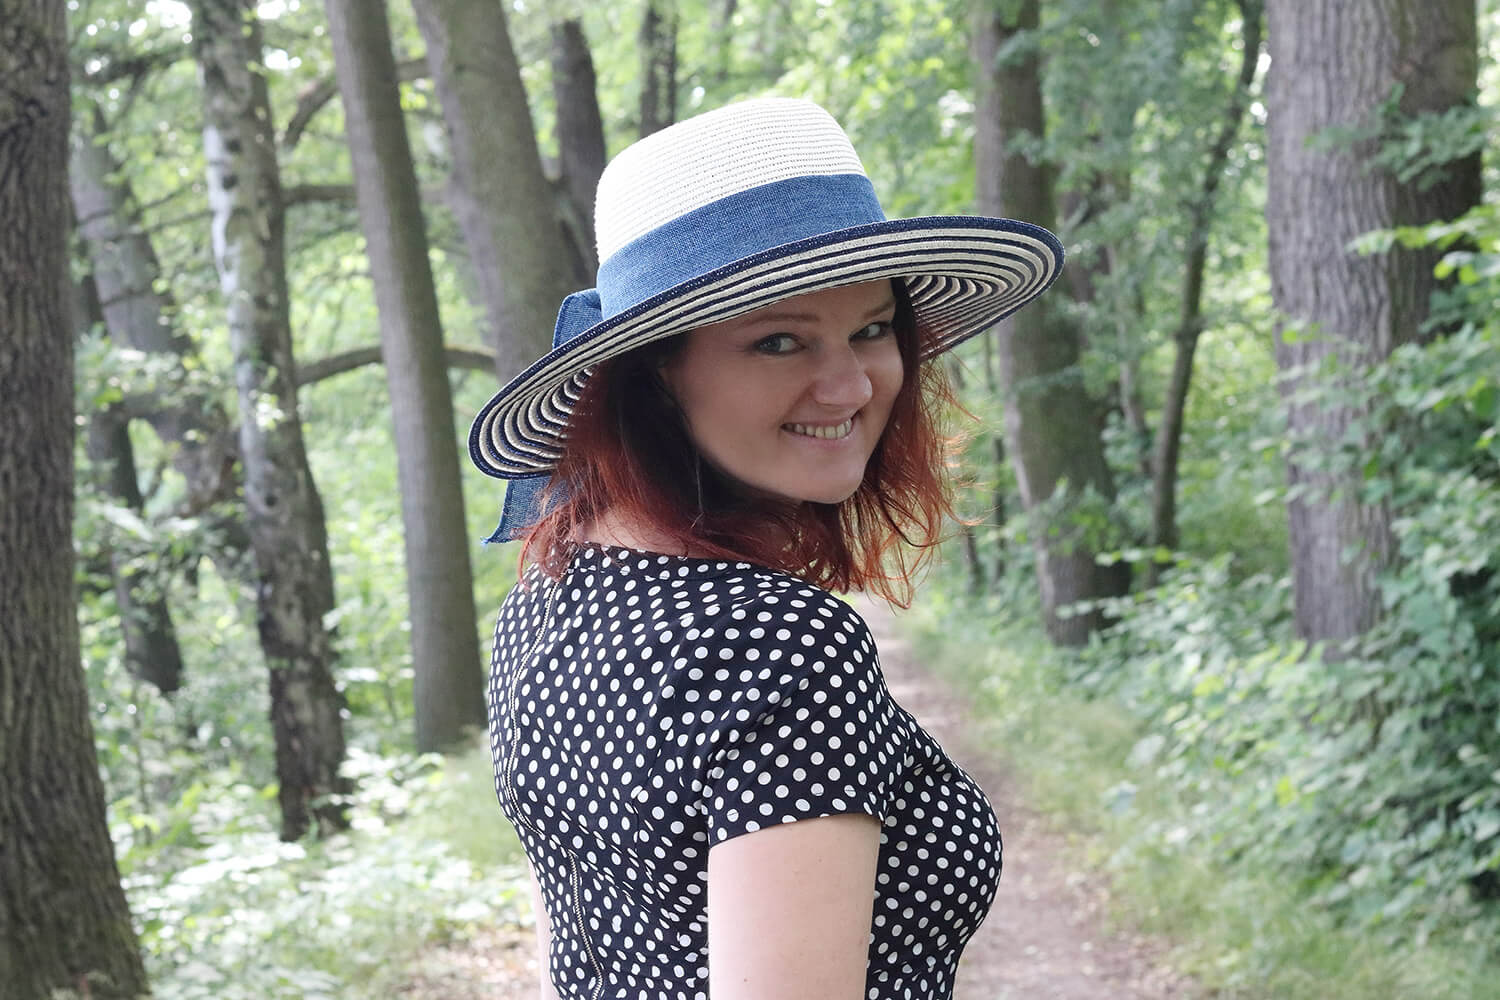 portrait of a woman with a hat in nature